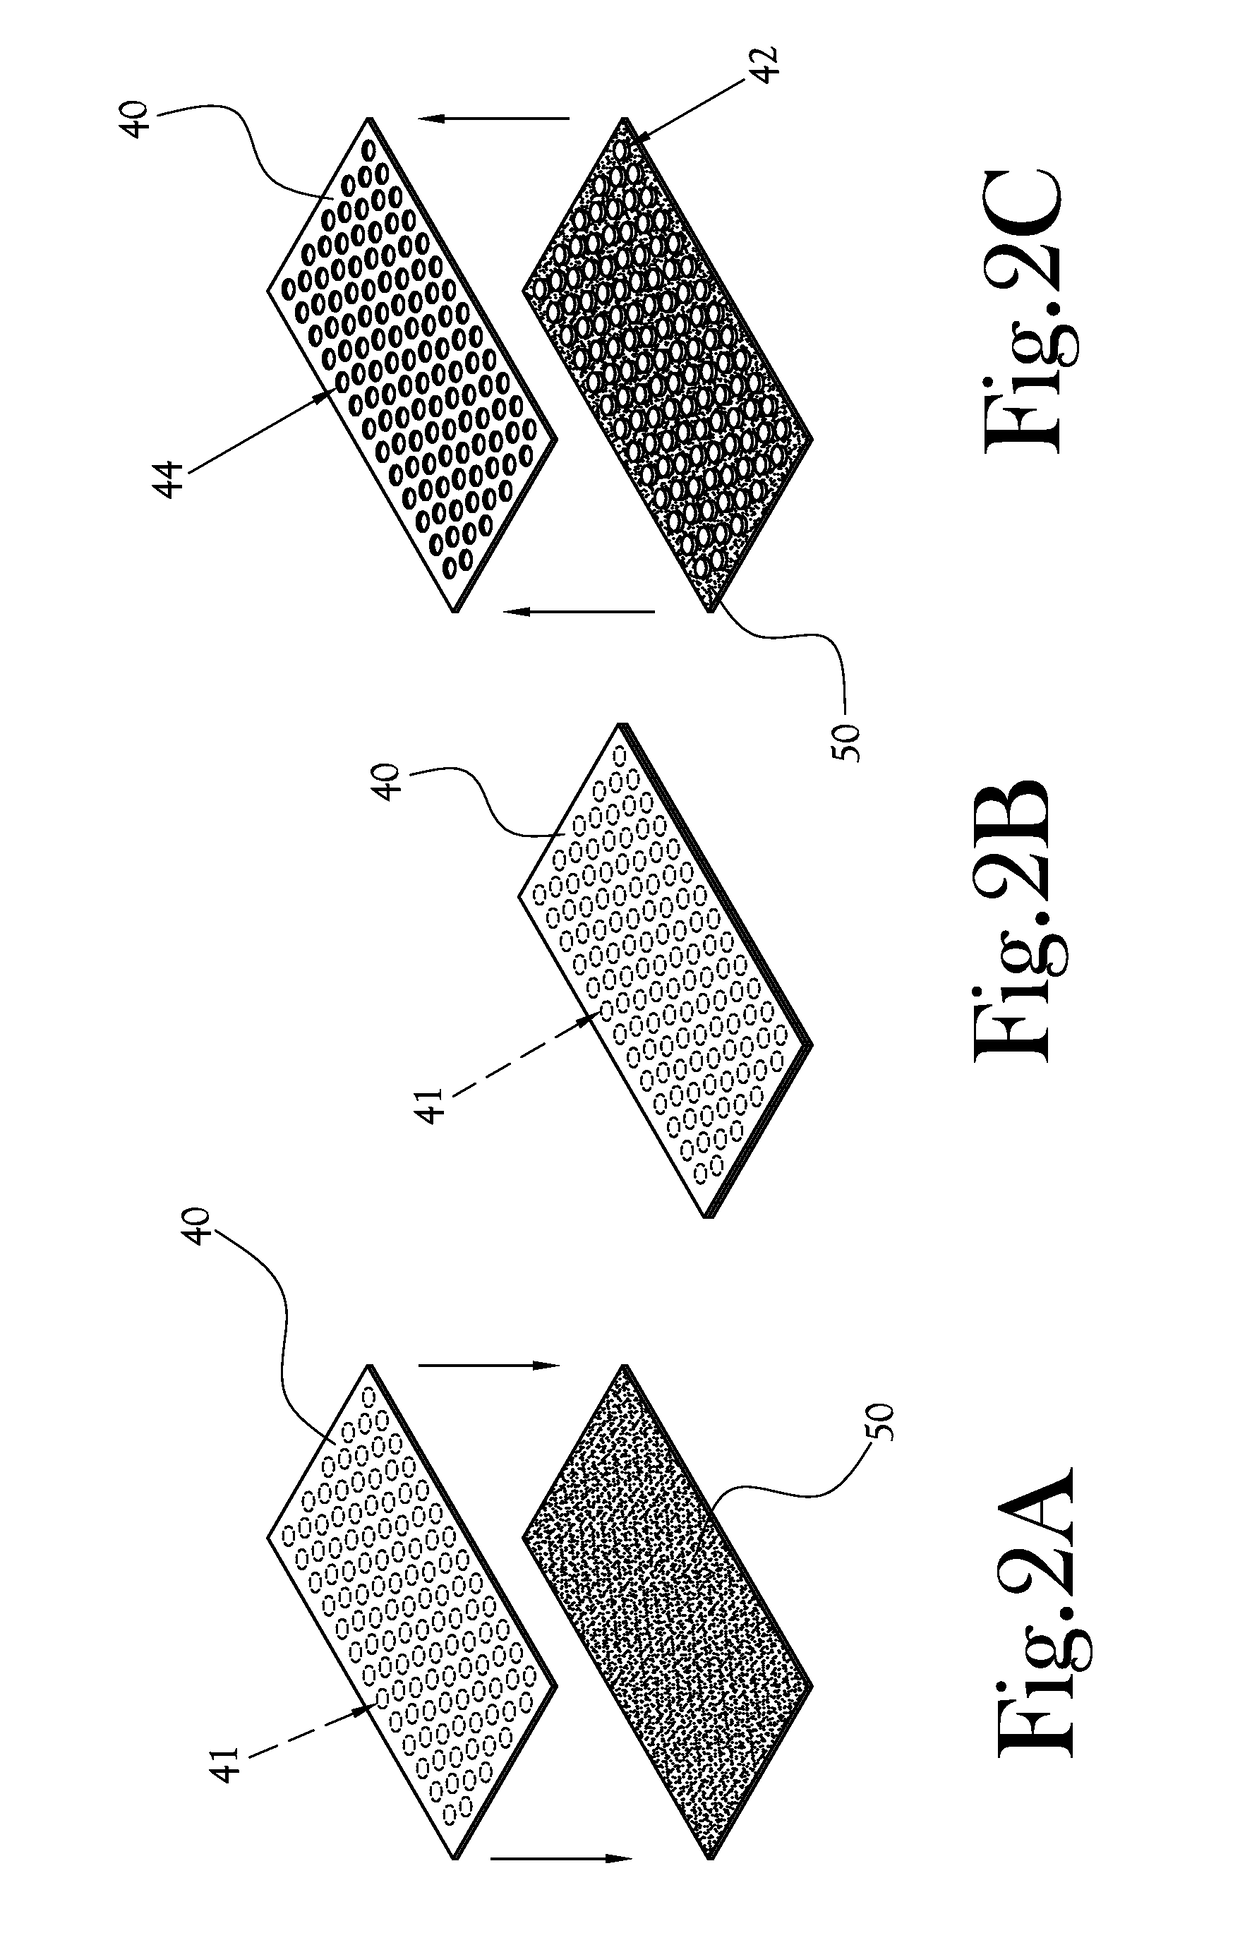 Perforated binder for laminated wound dressing